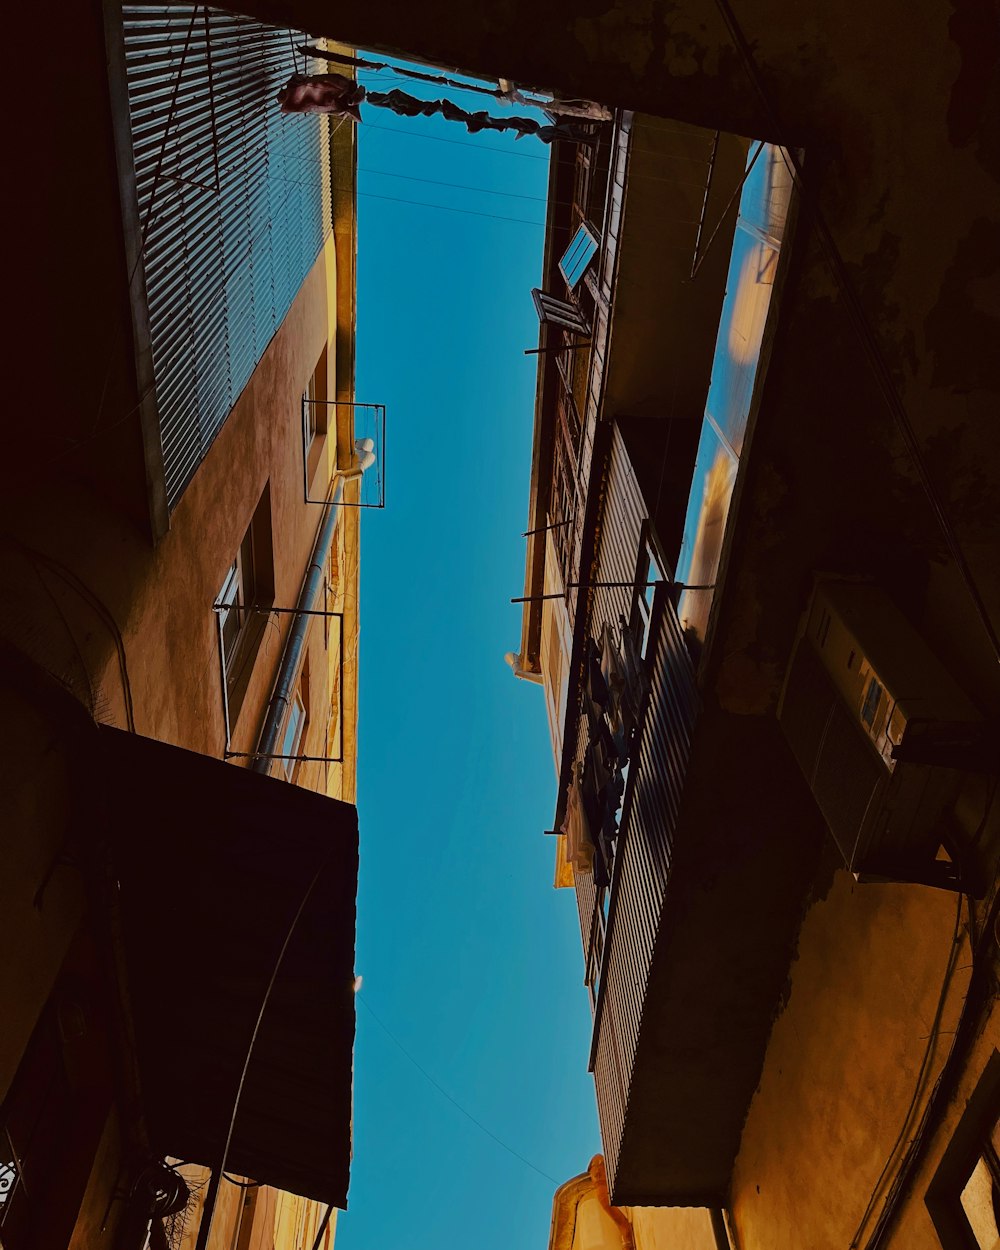 looking up at the sky from a narrow alleyway